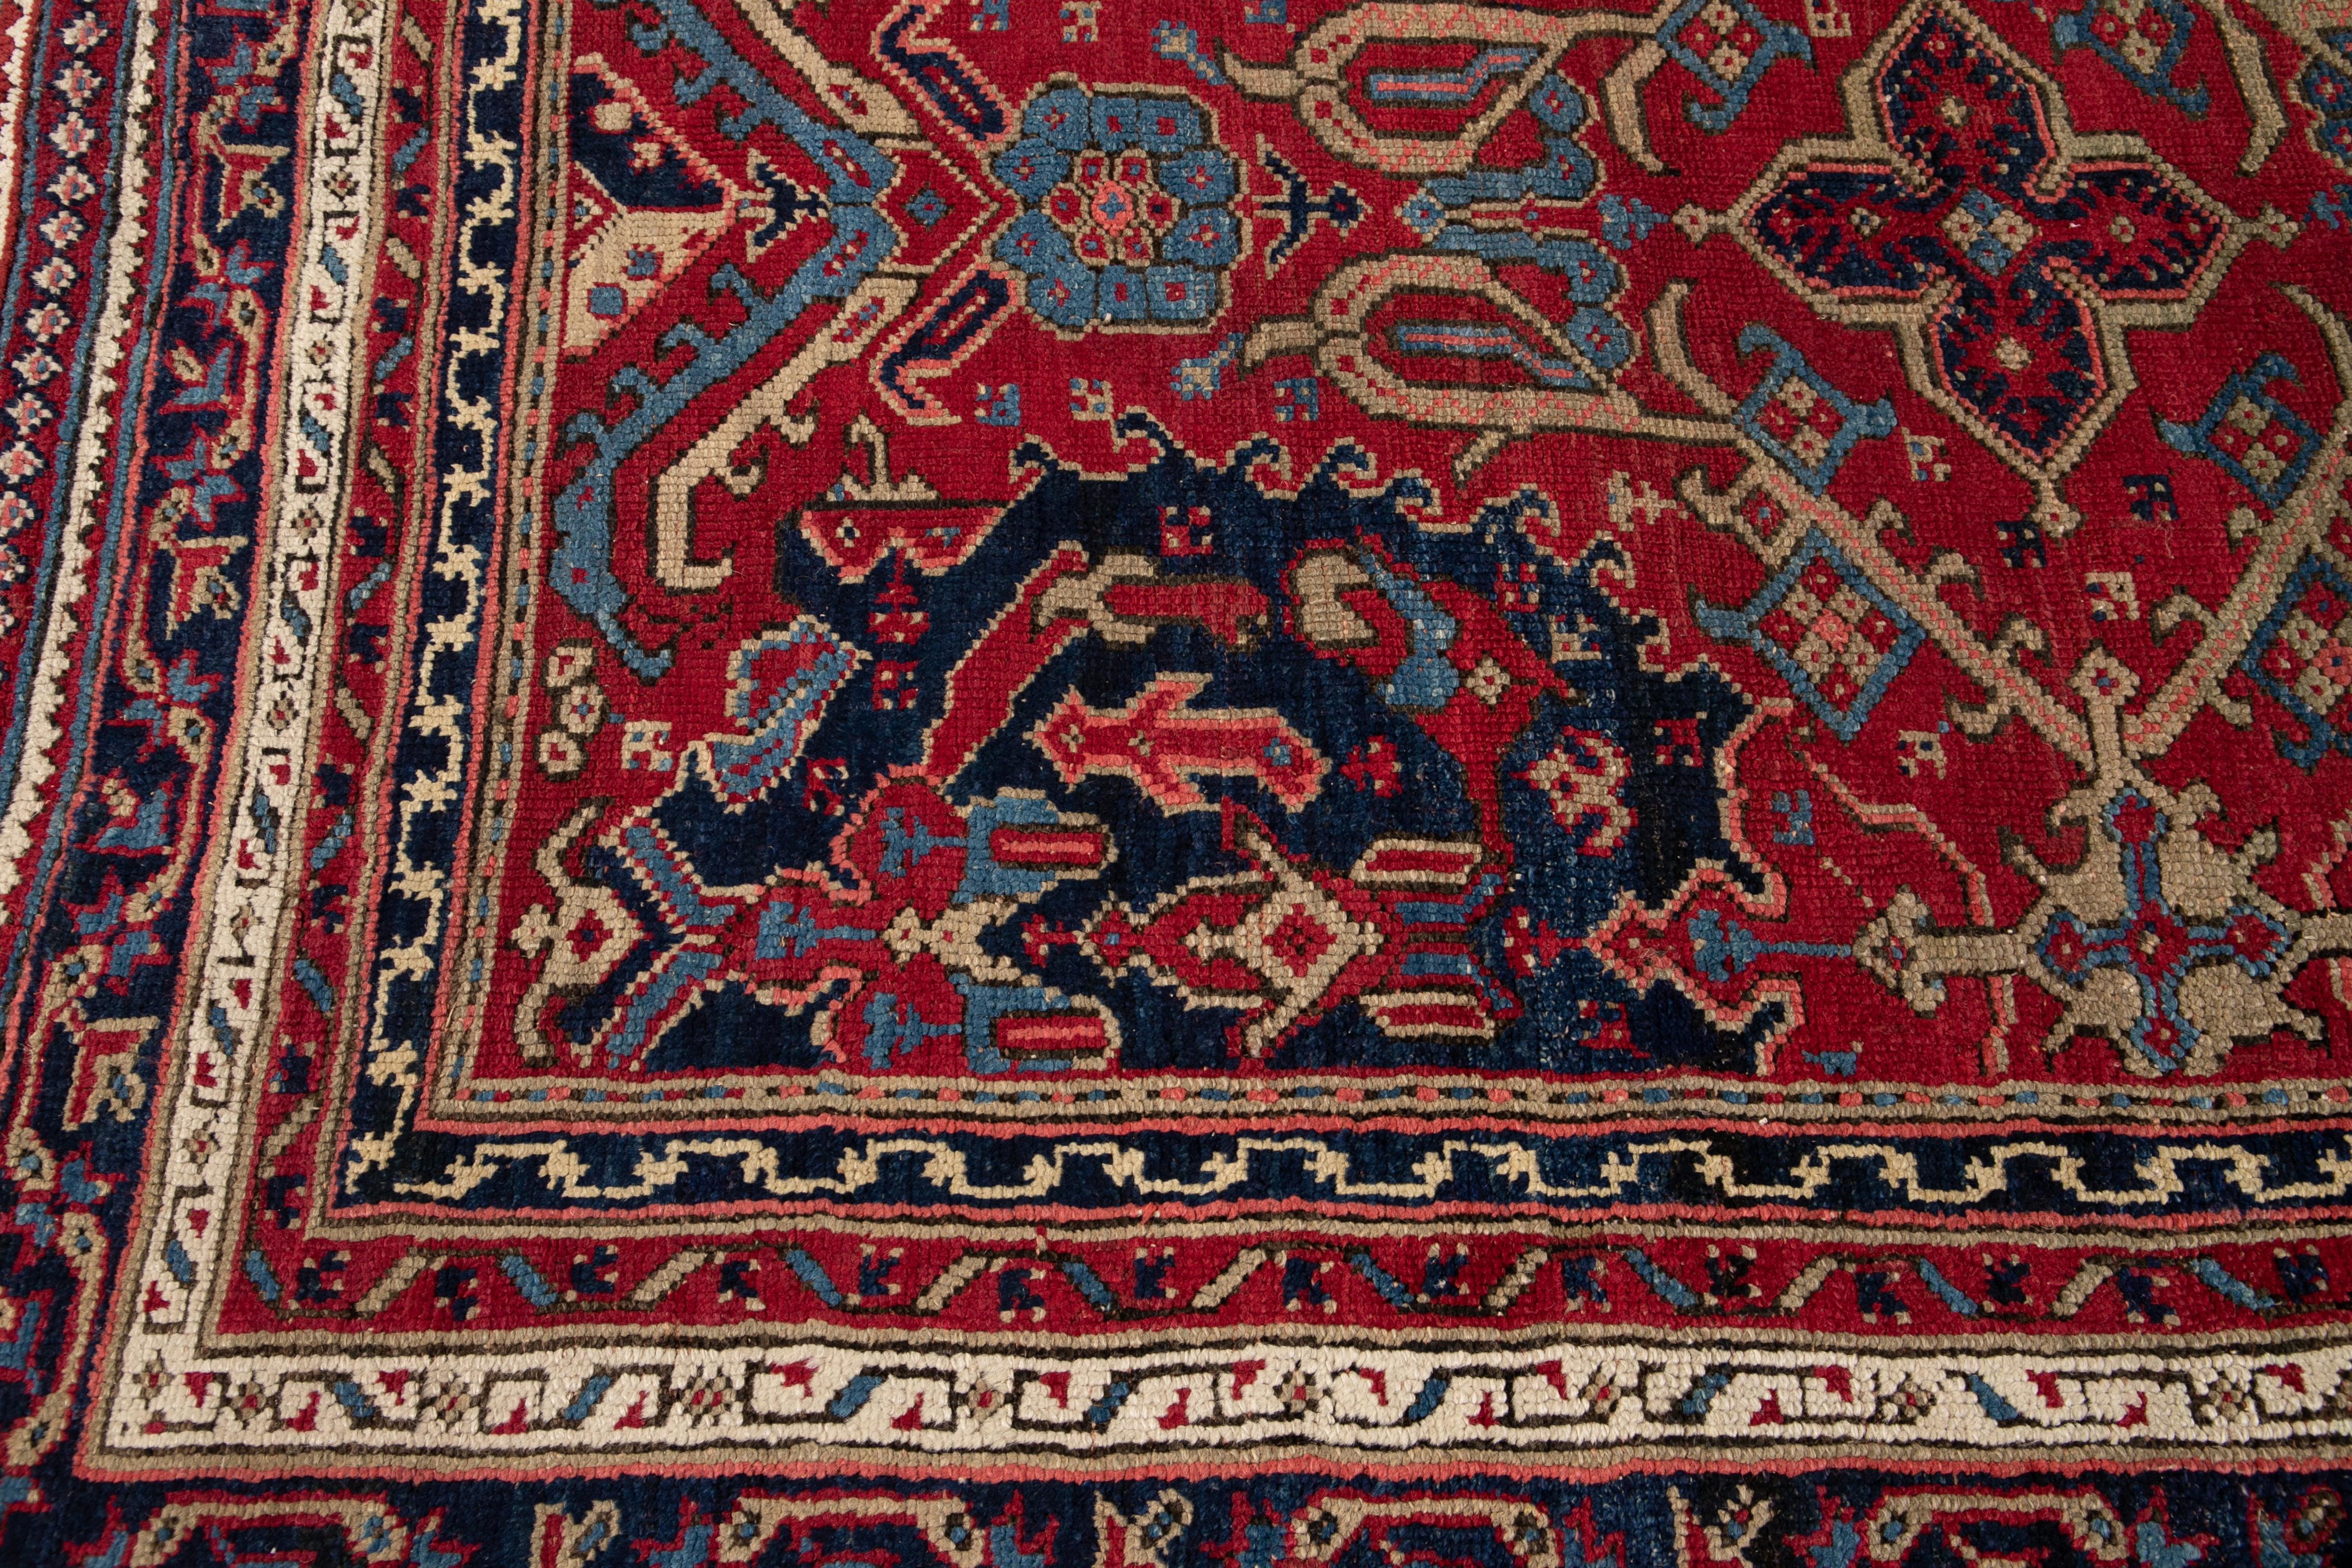 Red Antique Turkish Oushak Handmade Allover Designed Wool Rug In Excellent Condition For Sale In Norwalk, CT